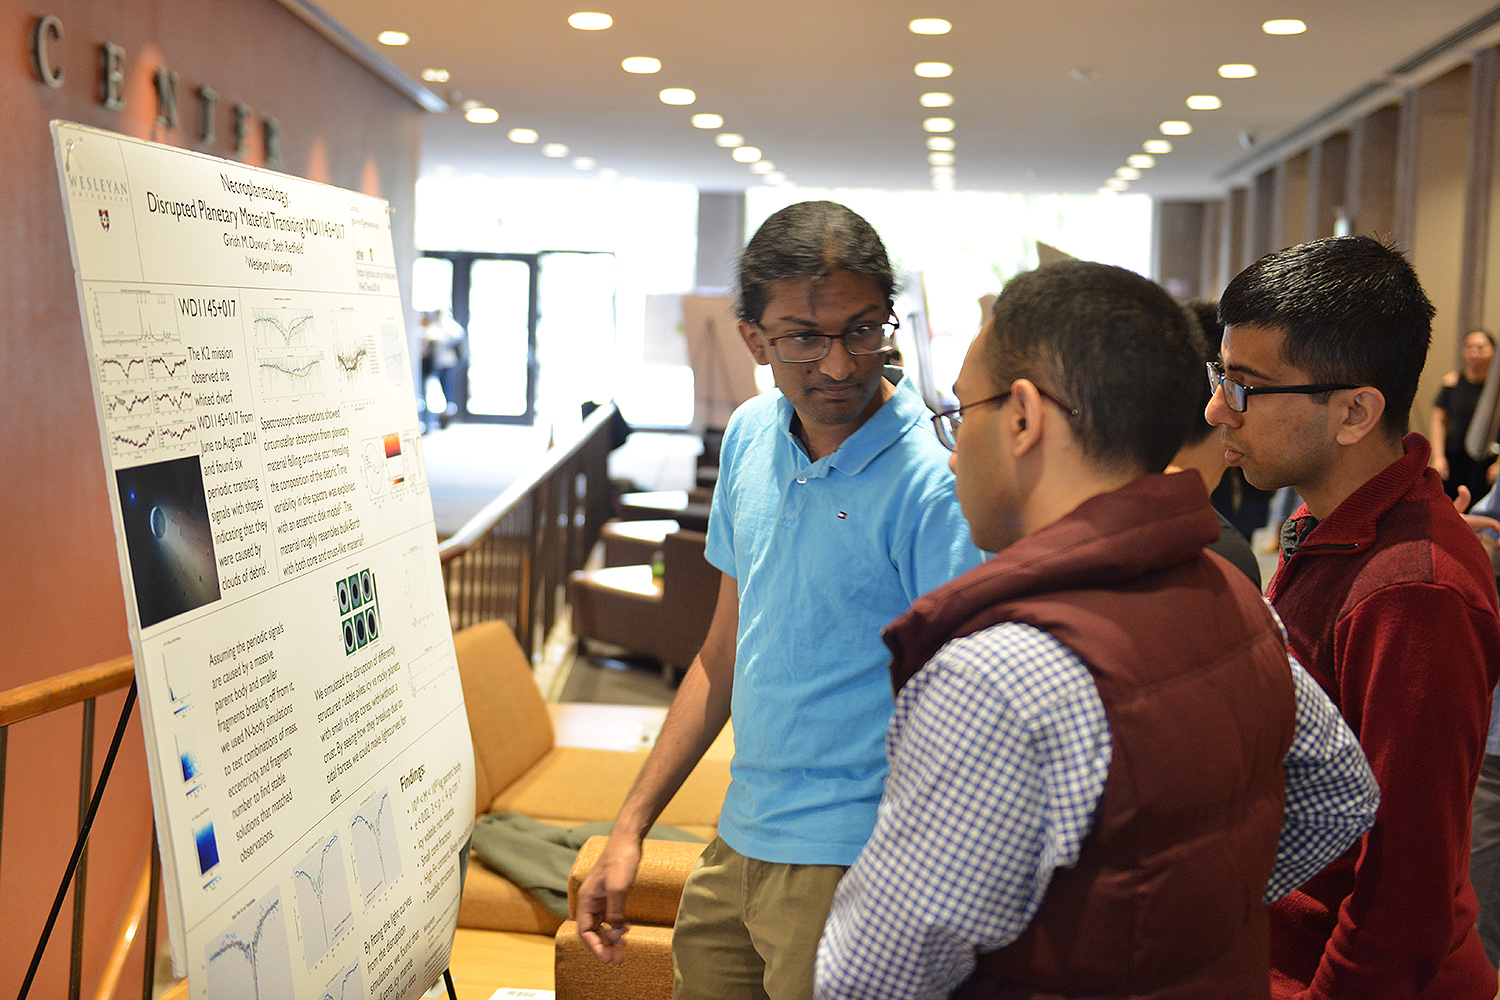 Girish Duvvuri ’17 presented his research titled “Necroplanetology: Disrupted Planetary Material Transiting WDII45+017.” His advisor is Seth Redfield, associate professor of astronomy.